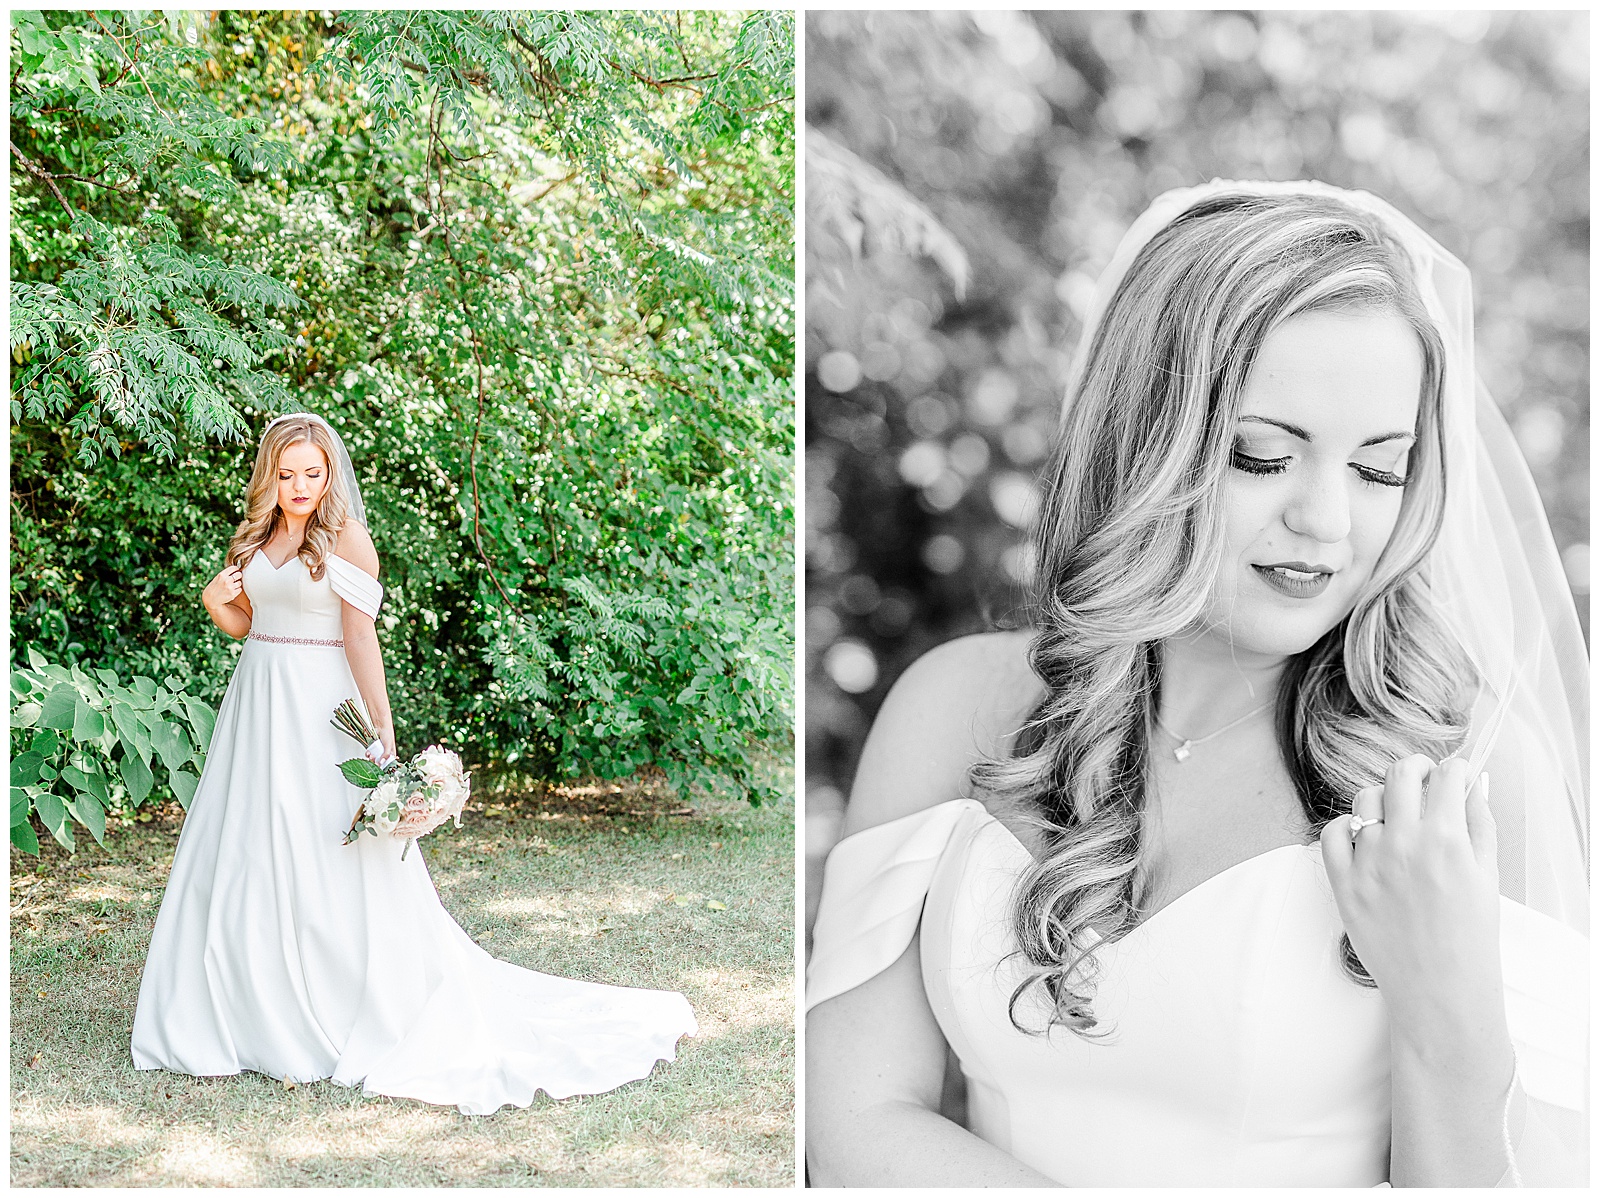 Elegant Off Shoulder Wedding Dress on Stunning Bride from Summer Wedding in Charlotte, NC | check out the full wedding at KevynDixonPhoto.com